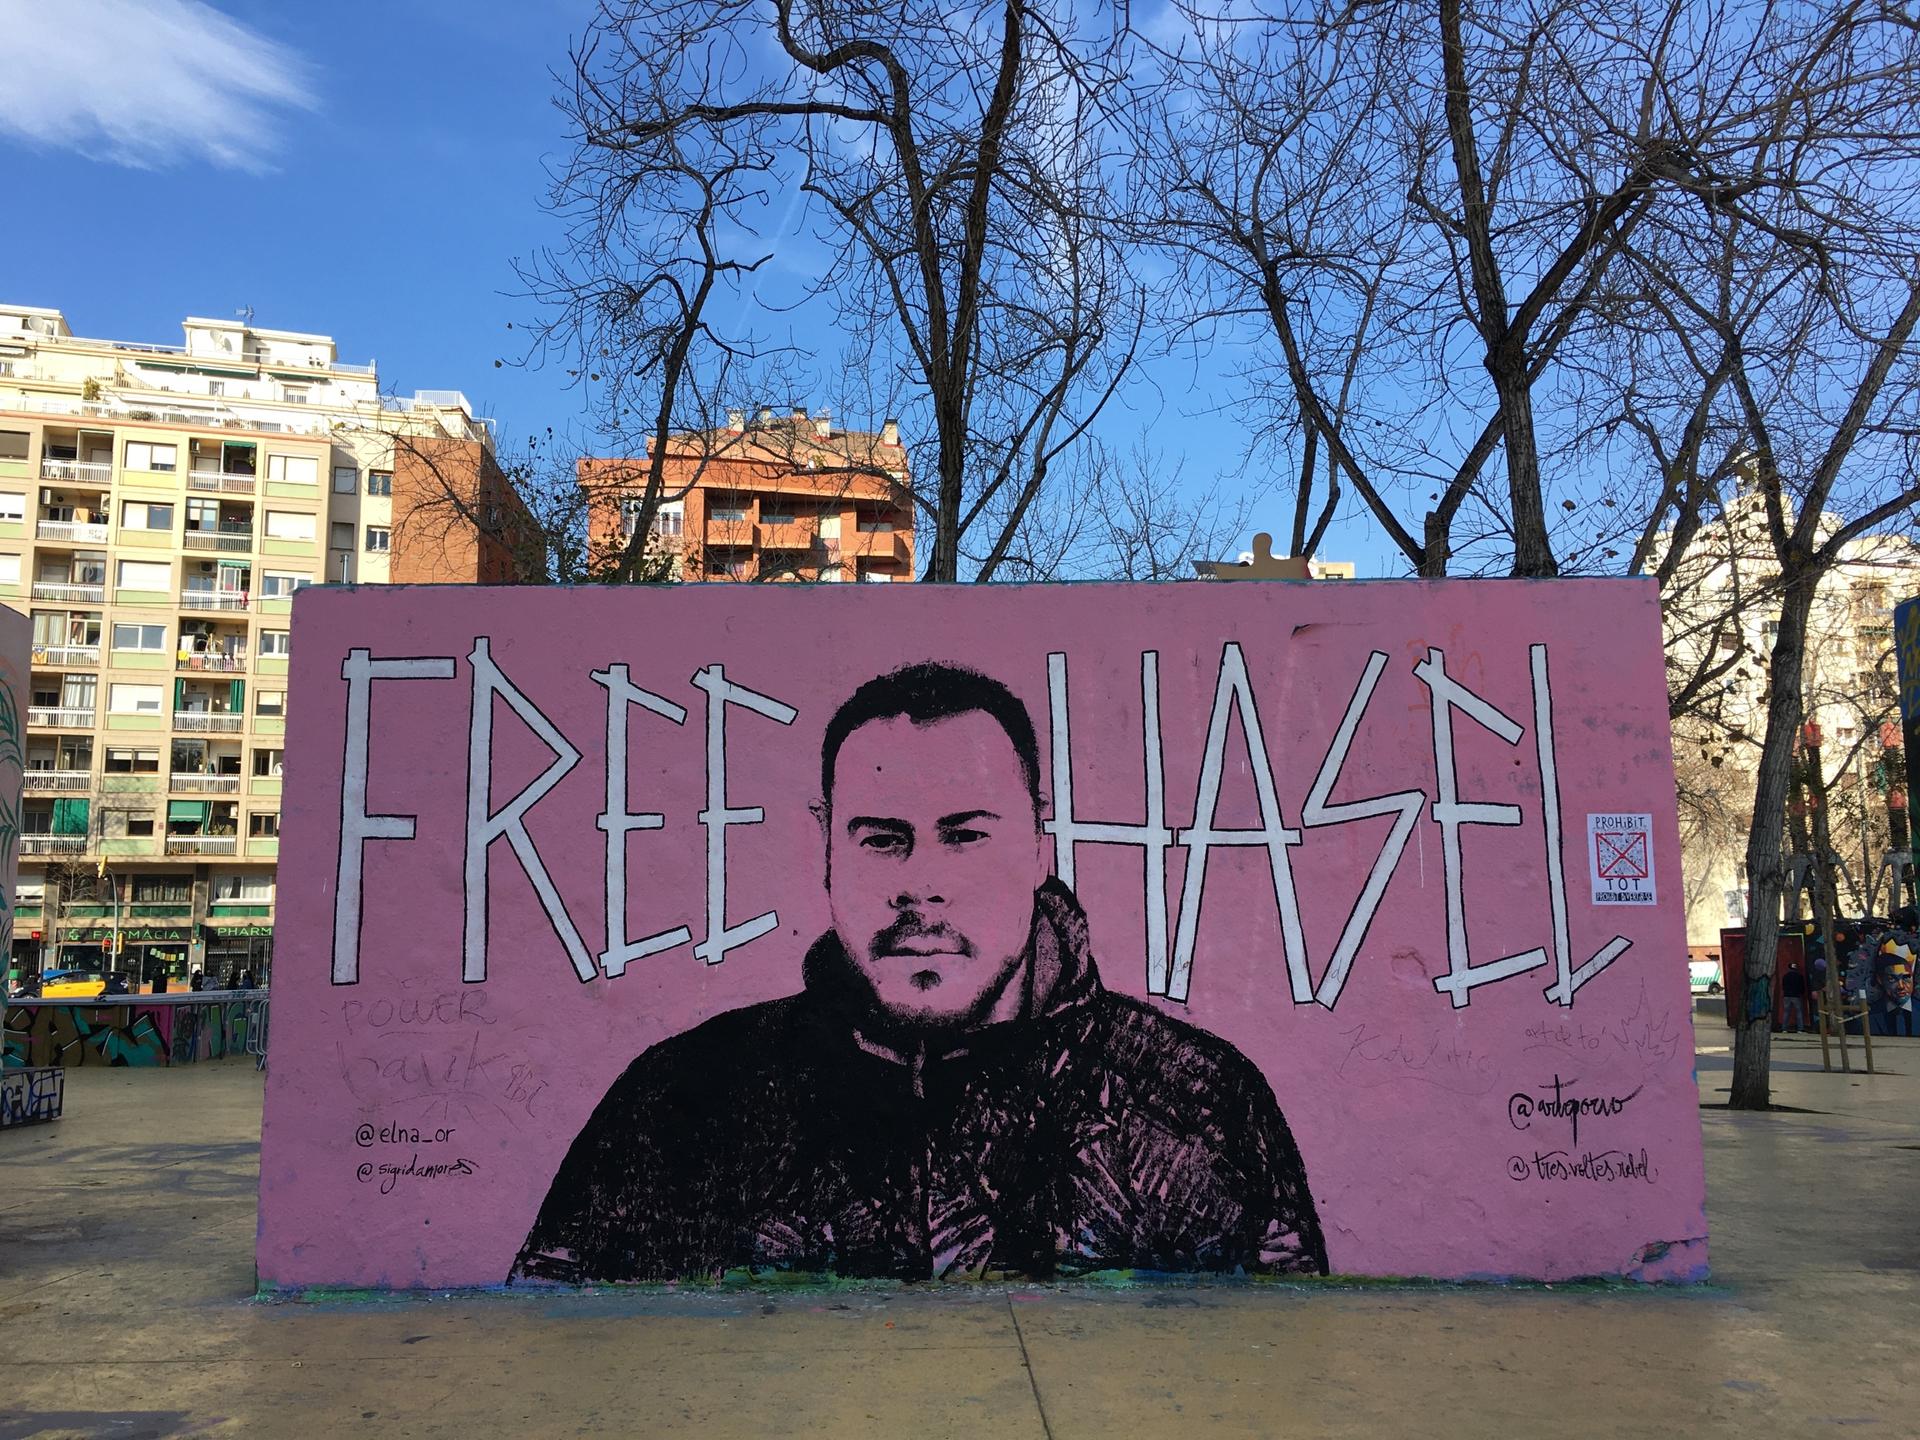 Protesters across Spain have taken to the streets to demand rapper Pablo Hasél’s release from prison and murals like this one have gone up across the country. This one from downtown Barcelona was painted earlier in the month, before the rapper's recent ar